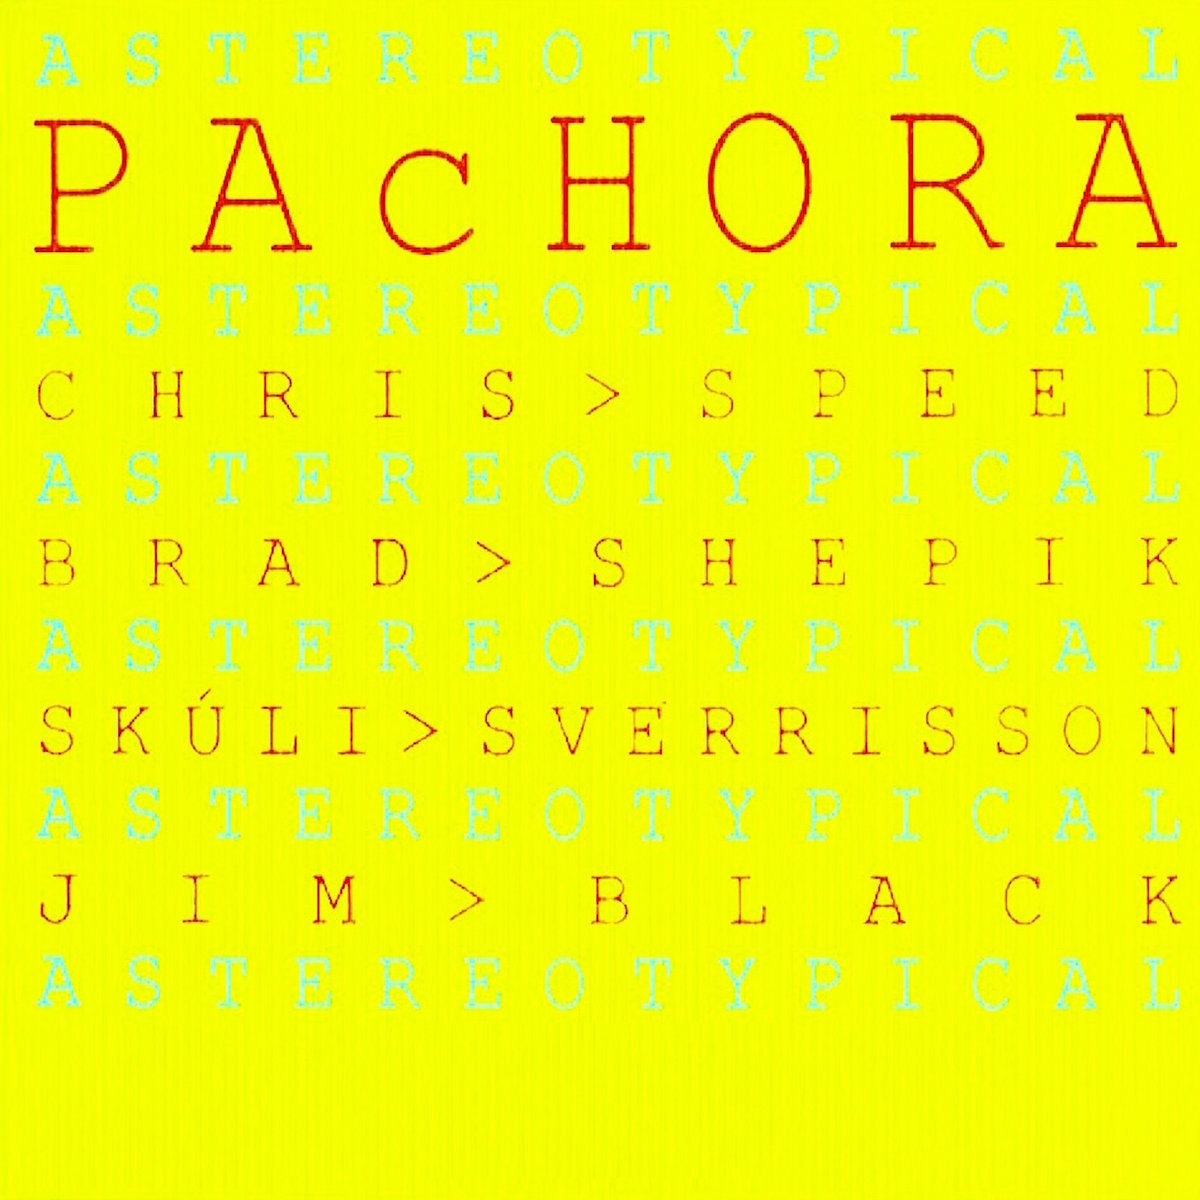 Pachora - 'Astereotypical' (2003, reissued 2021)